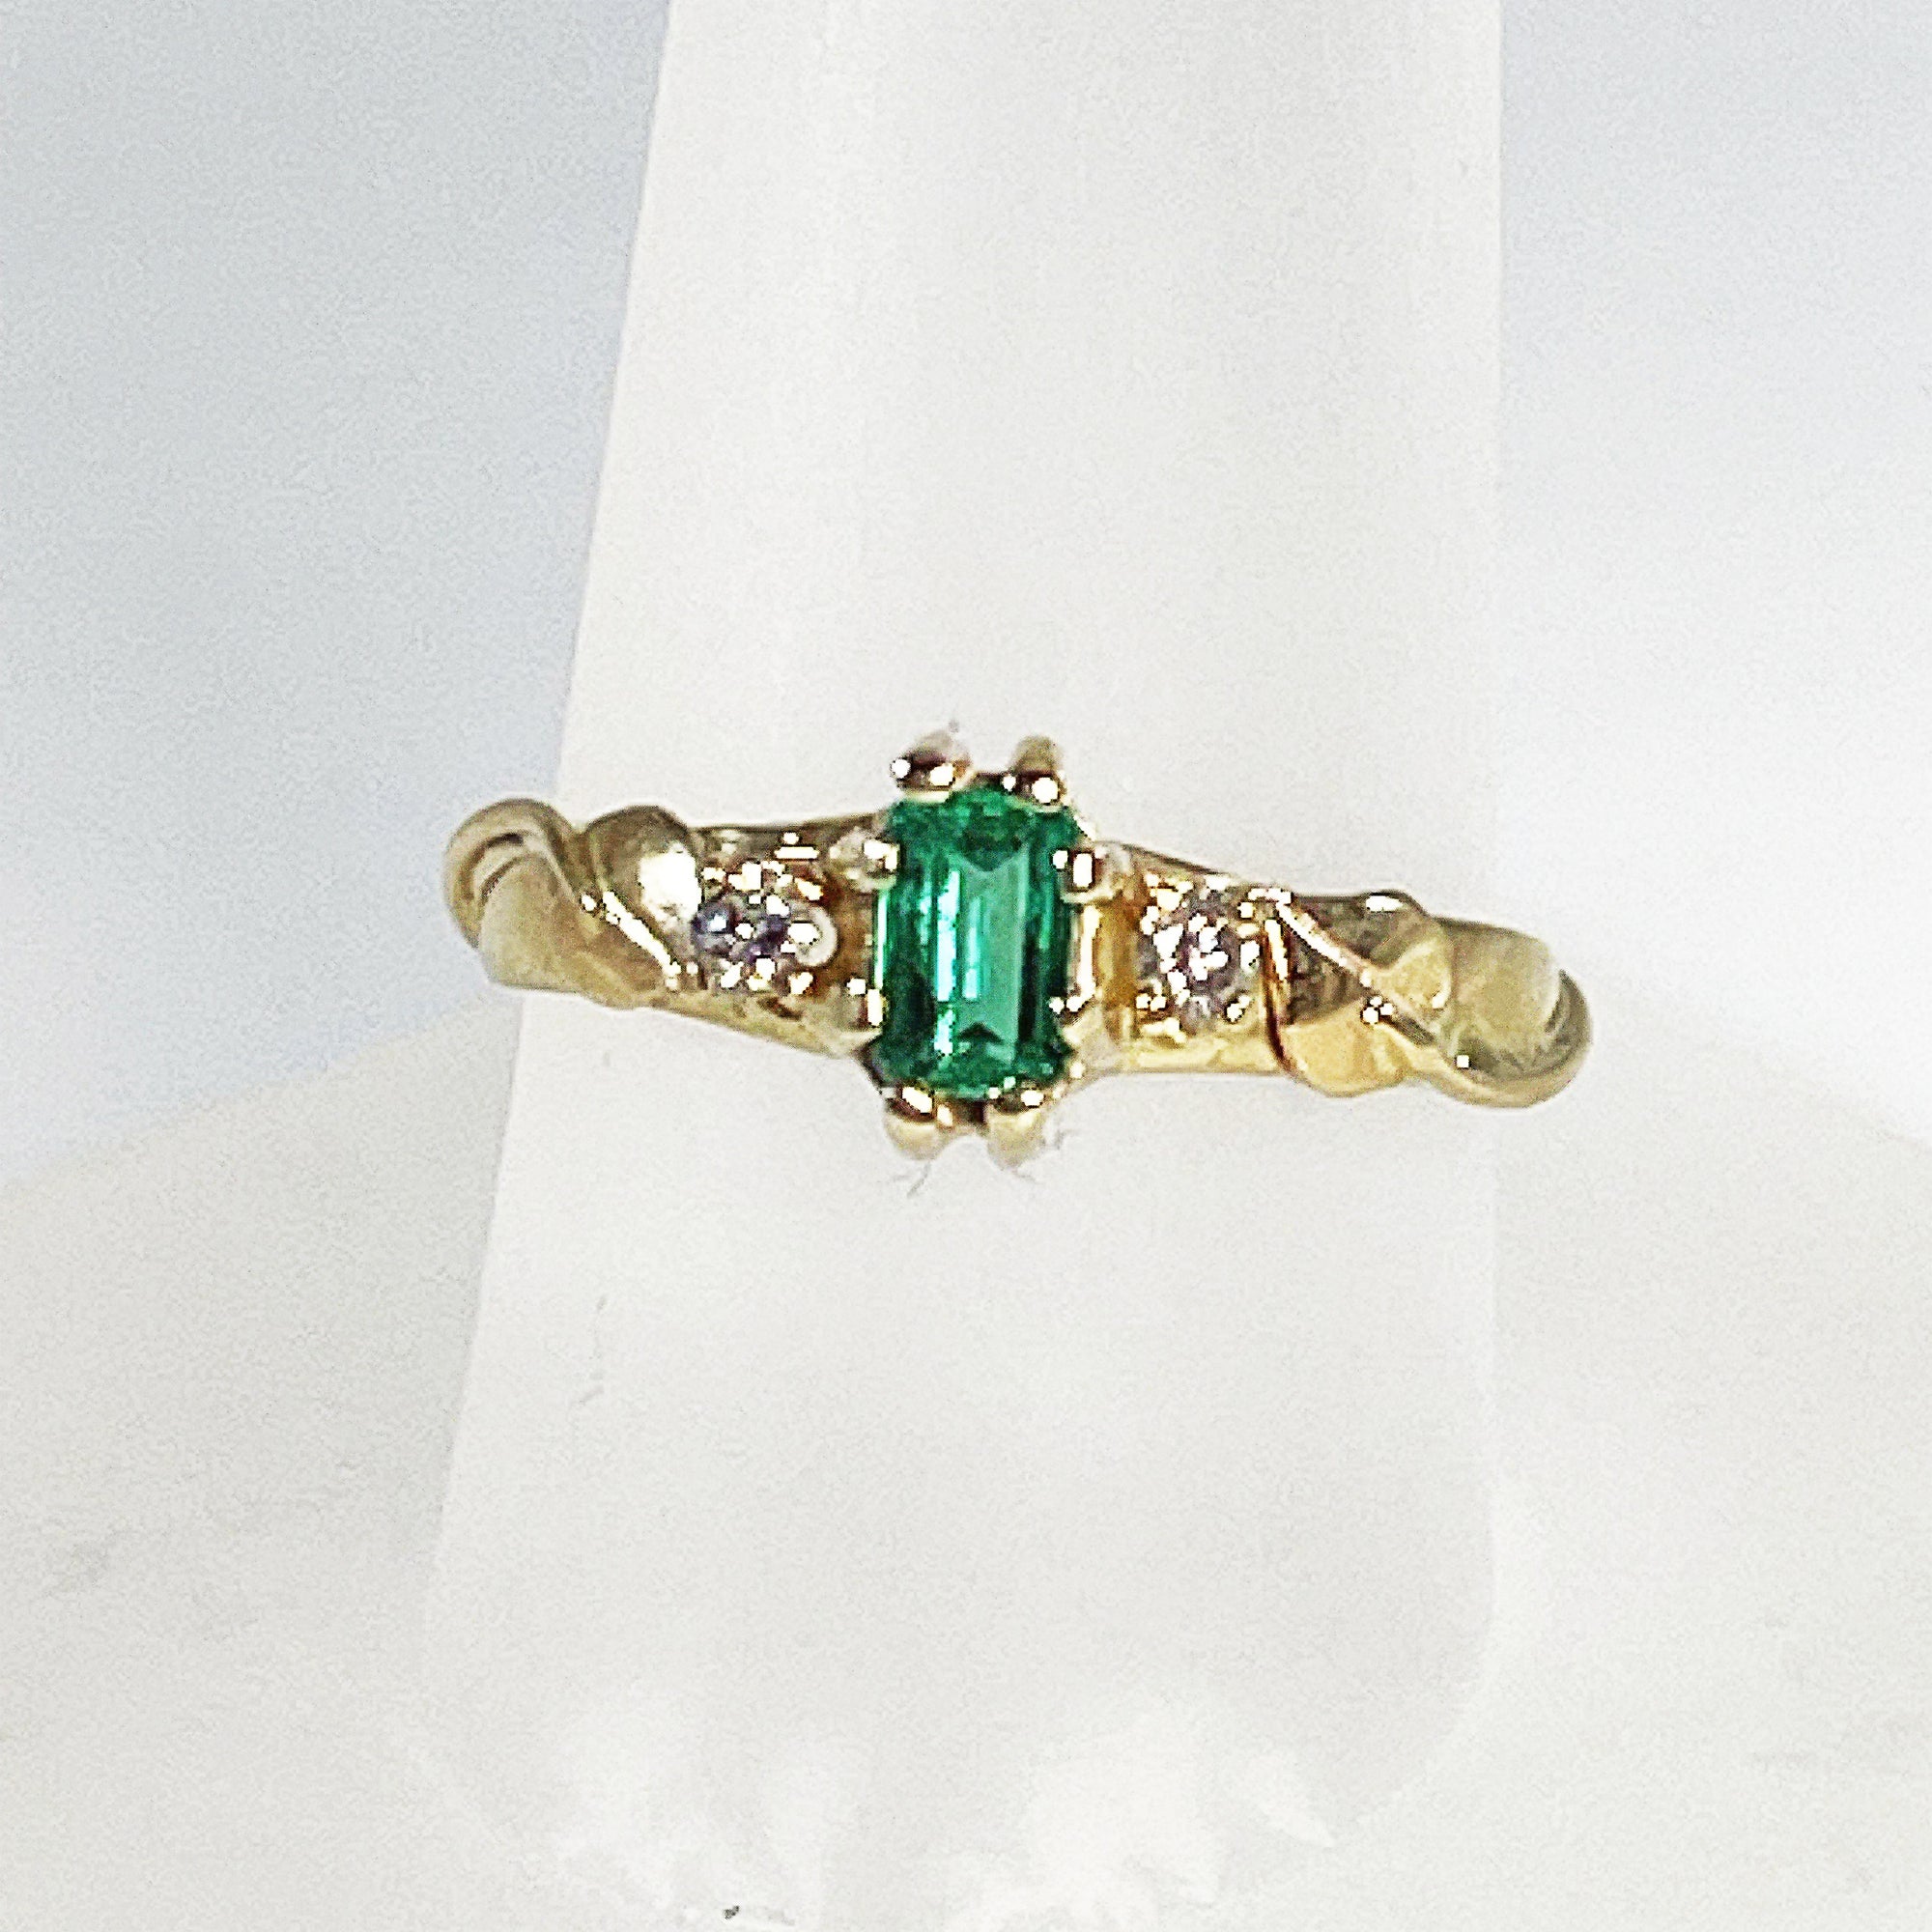 Cole Sheckler Ring - Emerald .32ct and Diamonds .10tcw in 14kt Yellow Gold w/ Leaves